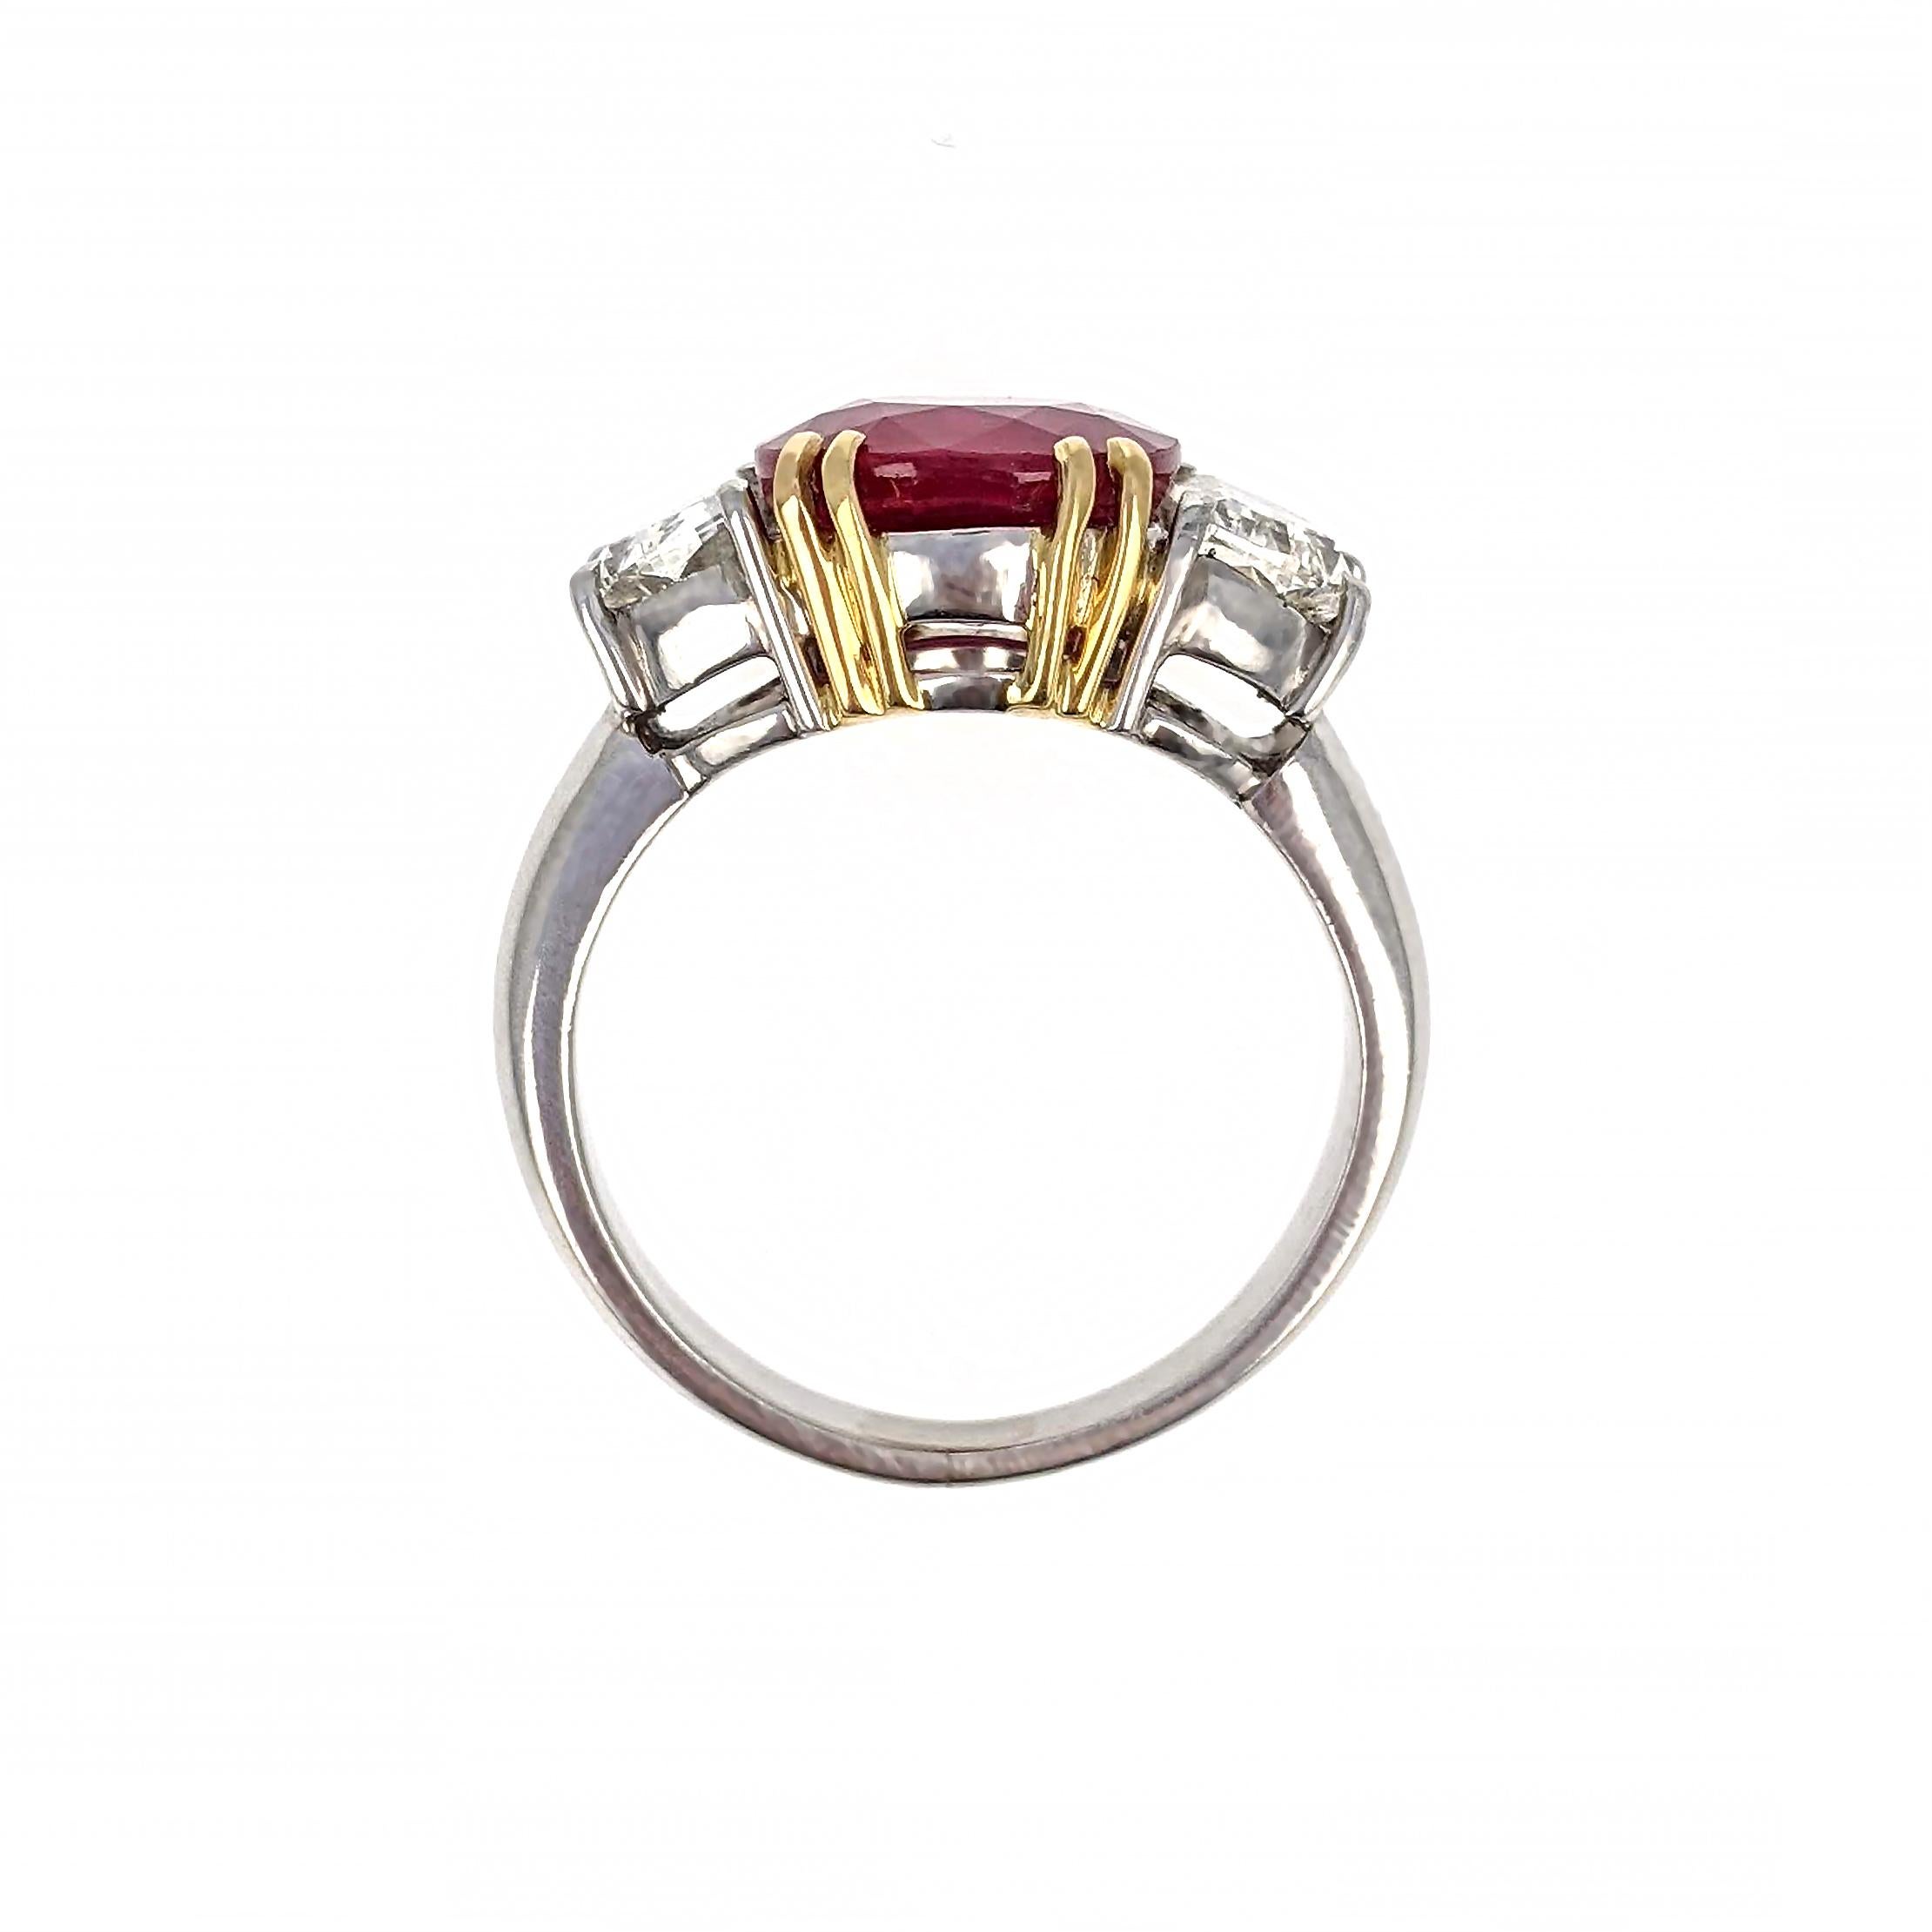 4.07 Carat Burma Ruby Diamond Platinum and Gold Ring For Sale 1